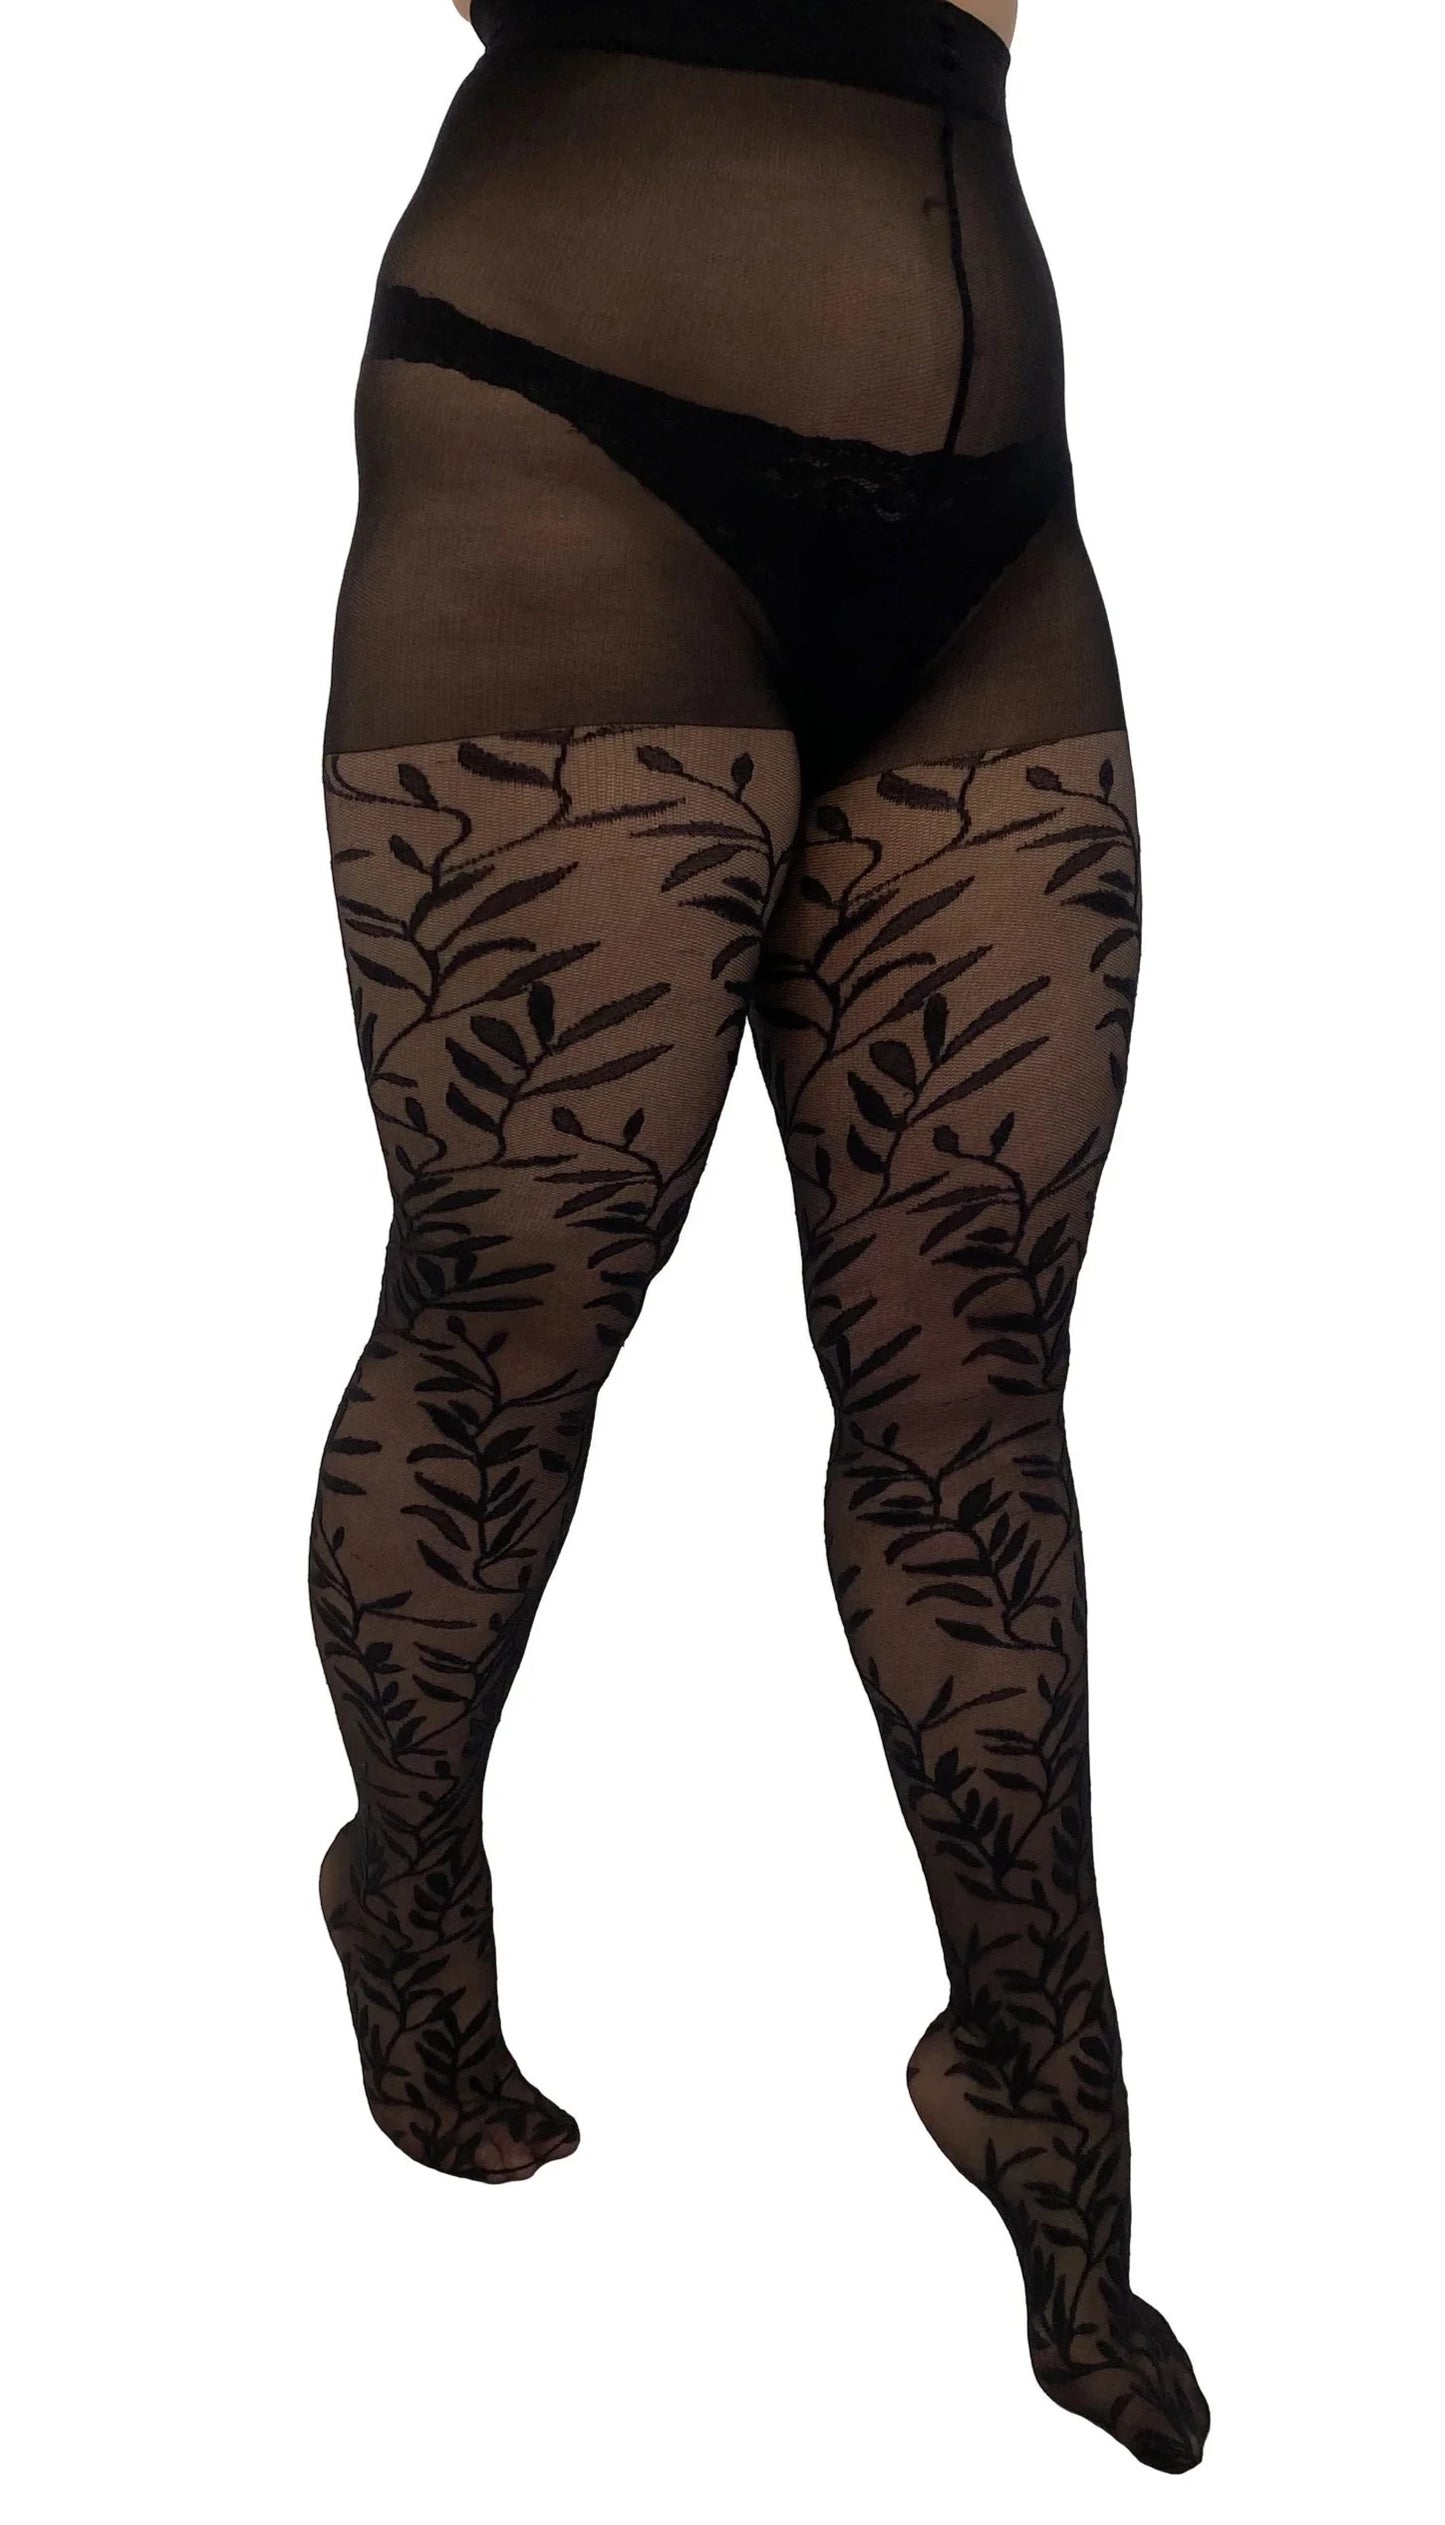 Pamela Mann Leaf Pattern Curvy Tights - Sheer black micro mesh curvy fashion tights with a woven vine leaf style pattern and deep boxer brief.